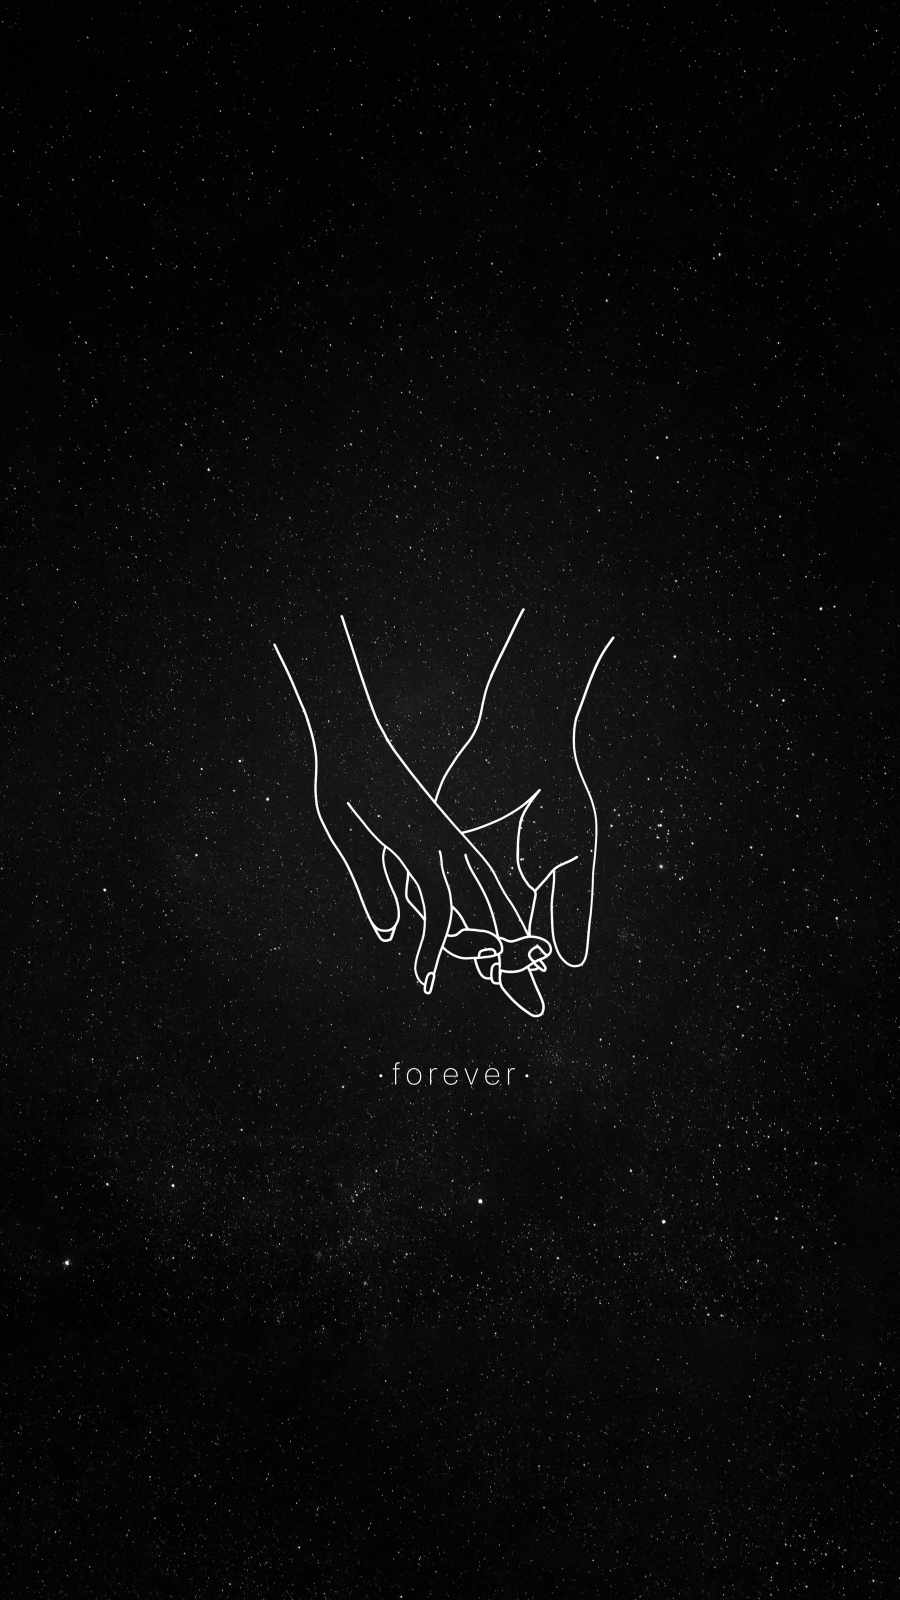 Forever Love IPhone Wallpaper  IPhone Wallpapers